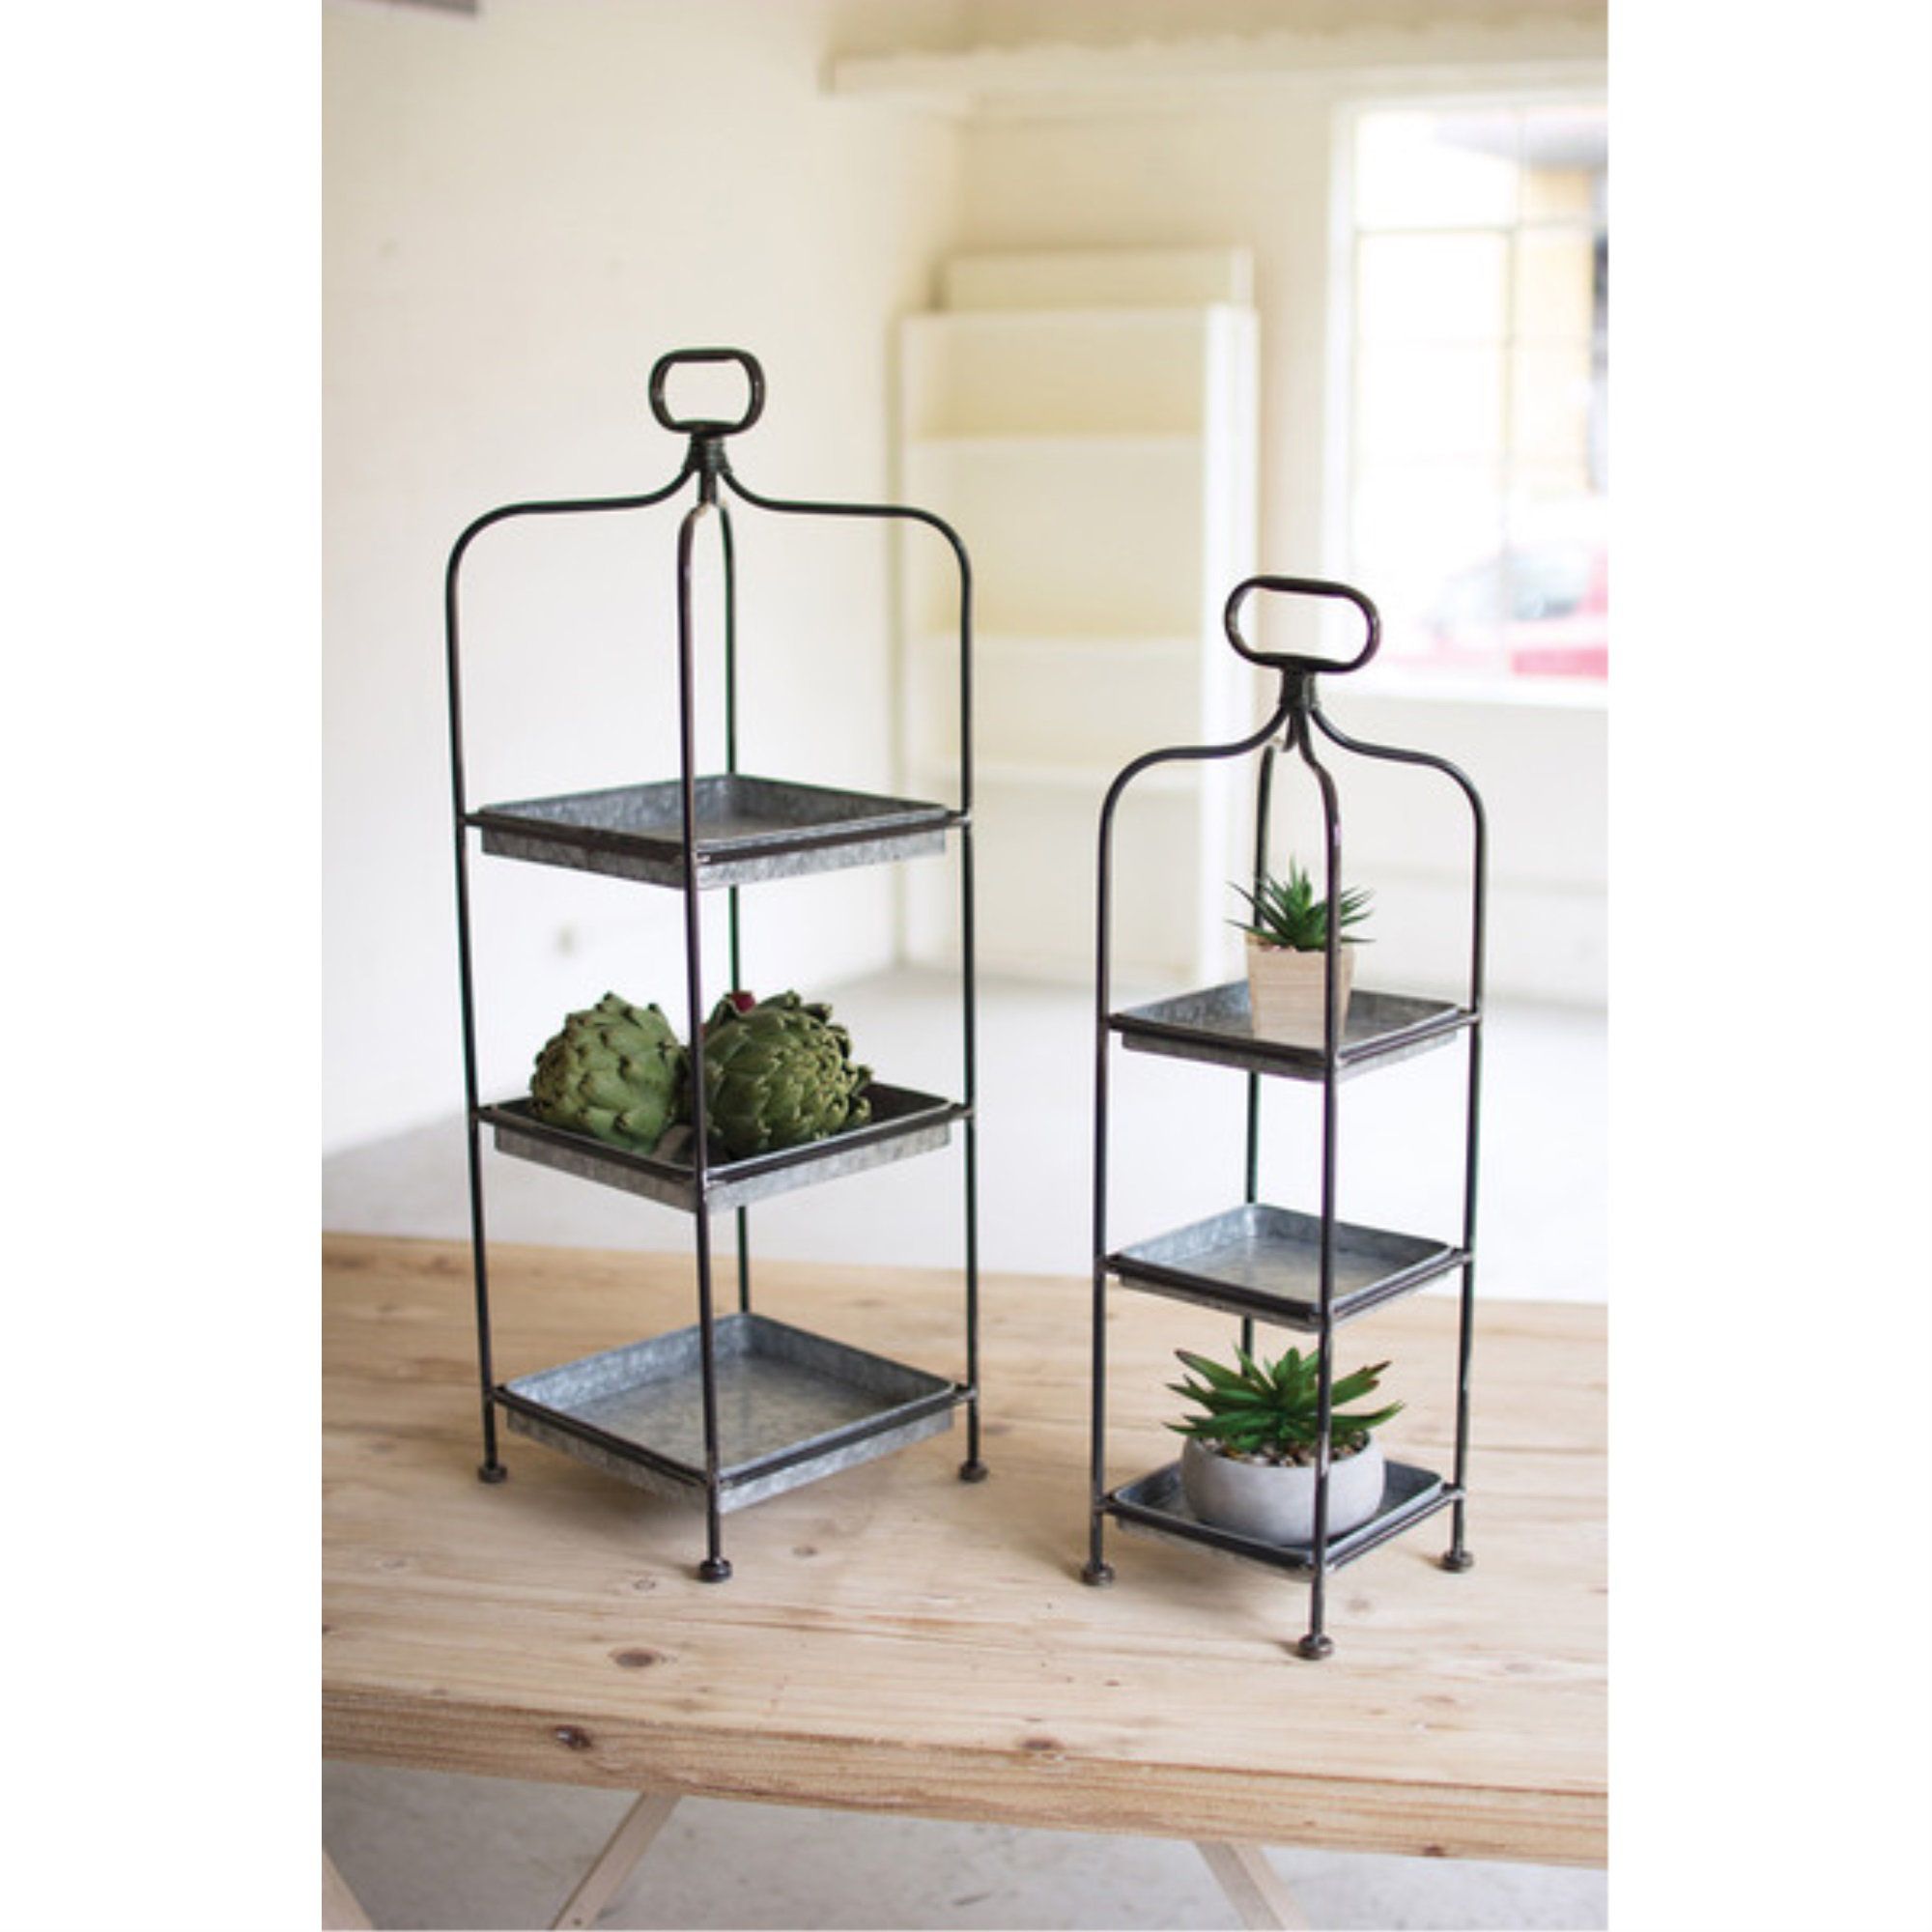 Three Posts Kolten Multi Tiered Plant Stand & Reviews – Wayfair Canada With Regard To Galvanized Plant Stands (View 15 of 15)